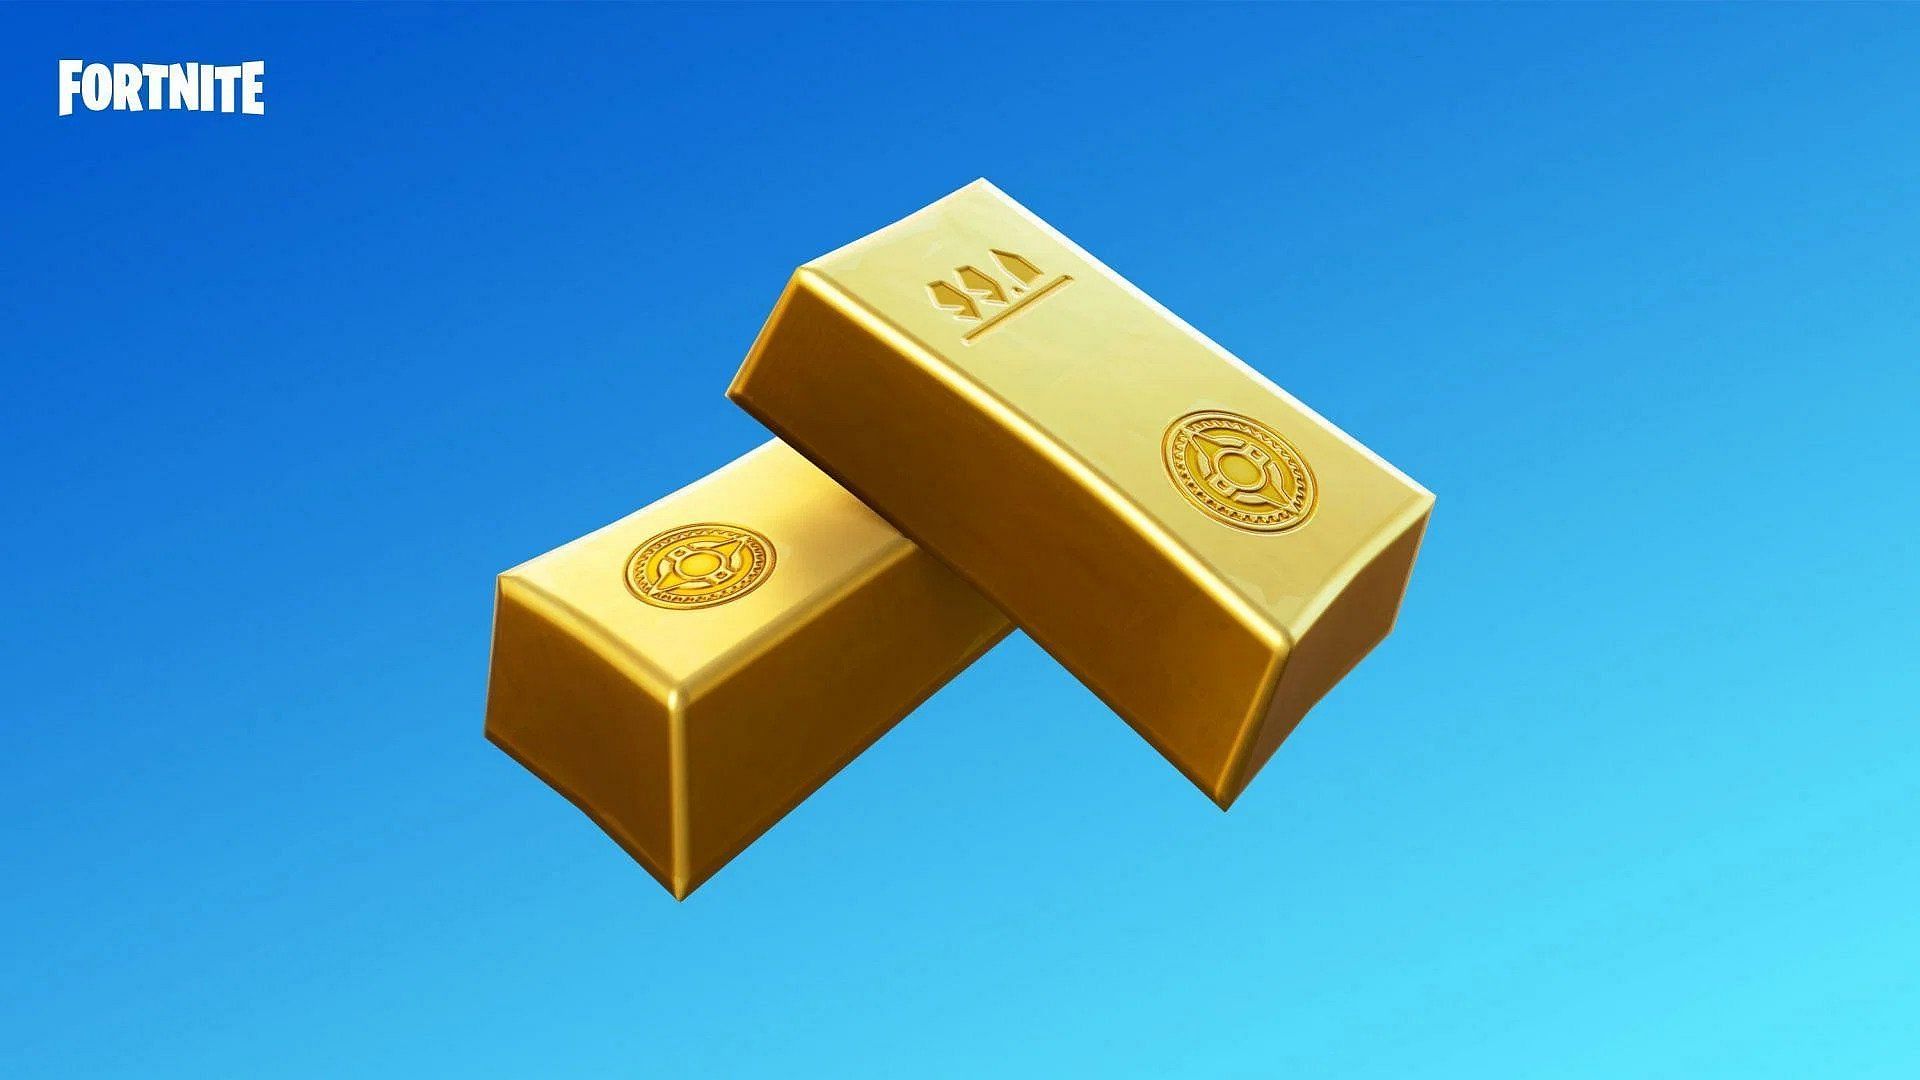 For the first time, gold bars rolled over in Fortnite. (Image via Epic Games)